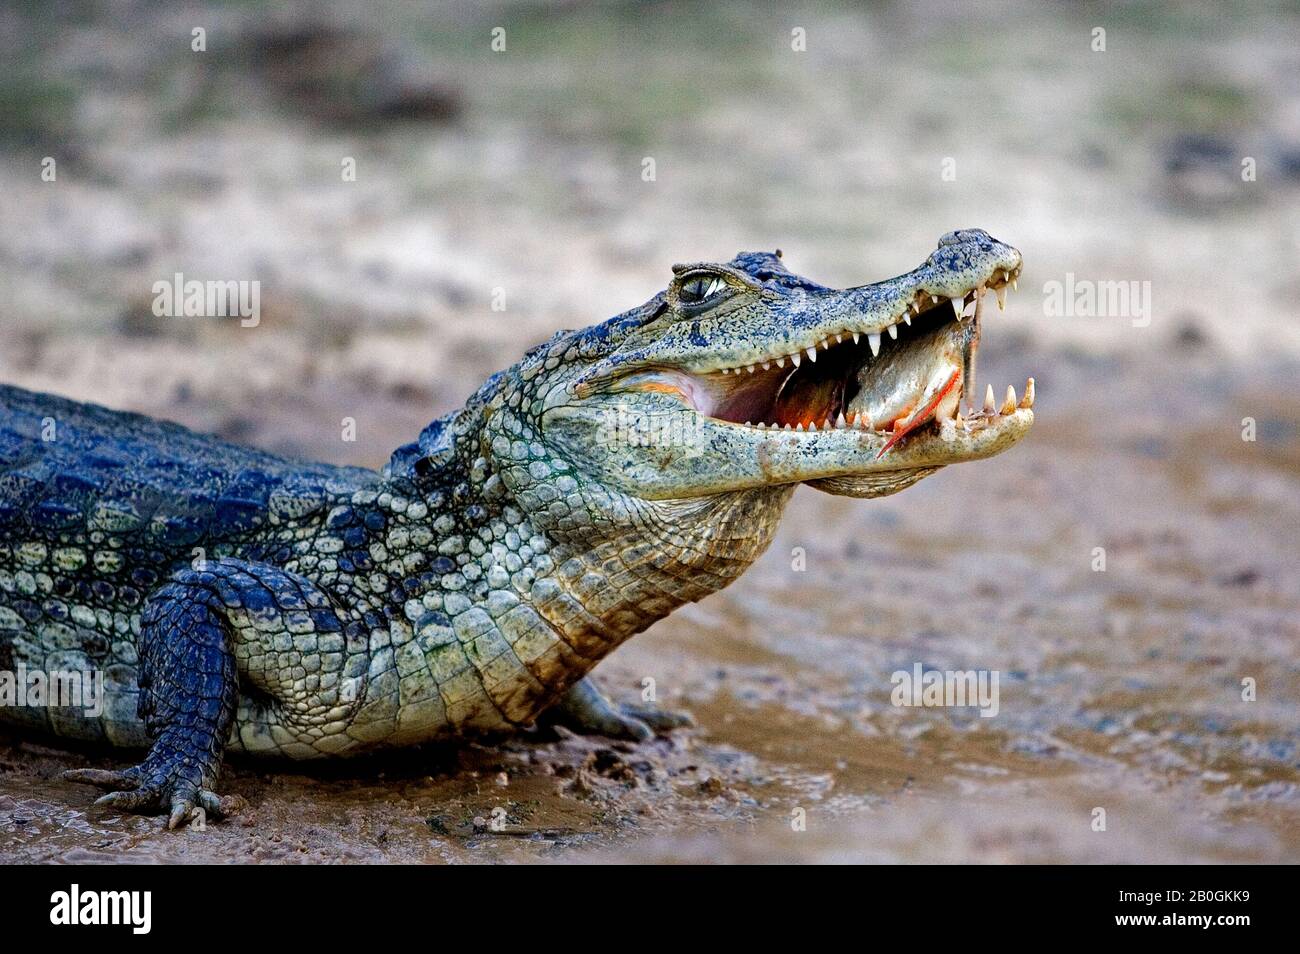 Spectacled Caiman, caiman crocodilus, Catching Fish in River, Los Lianos in Venezuela Stock Photo